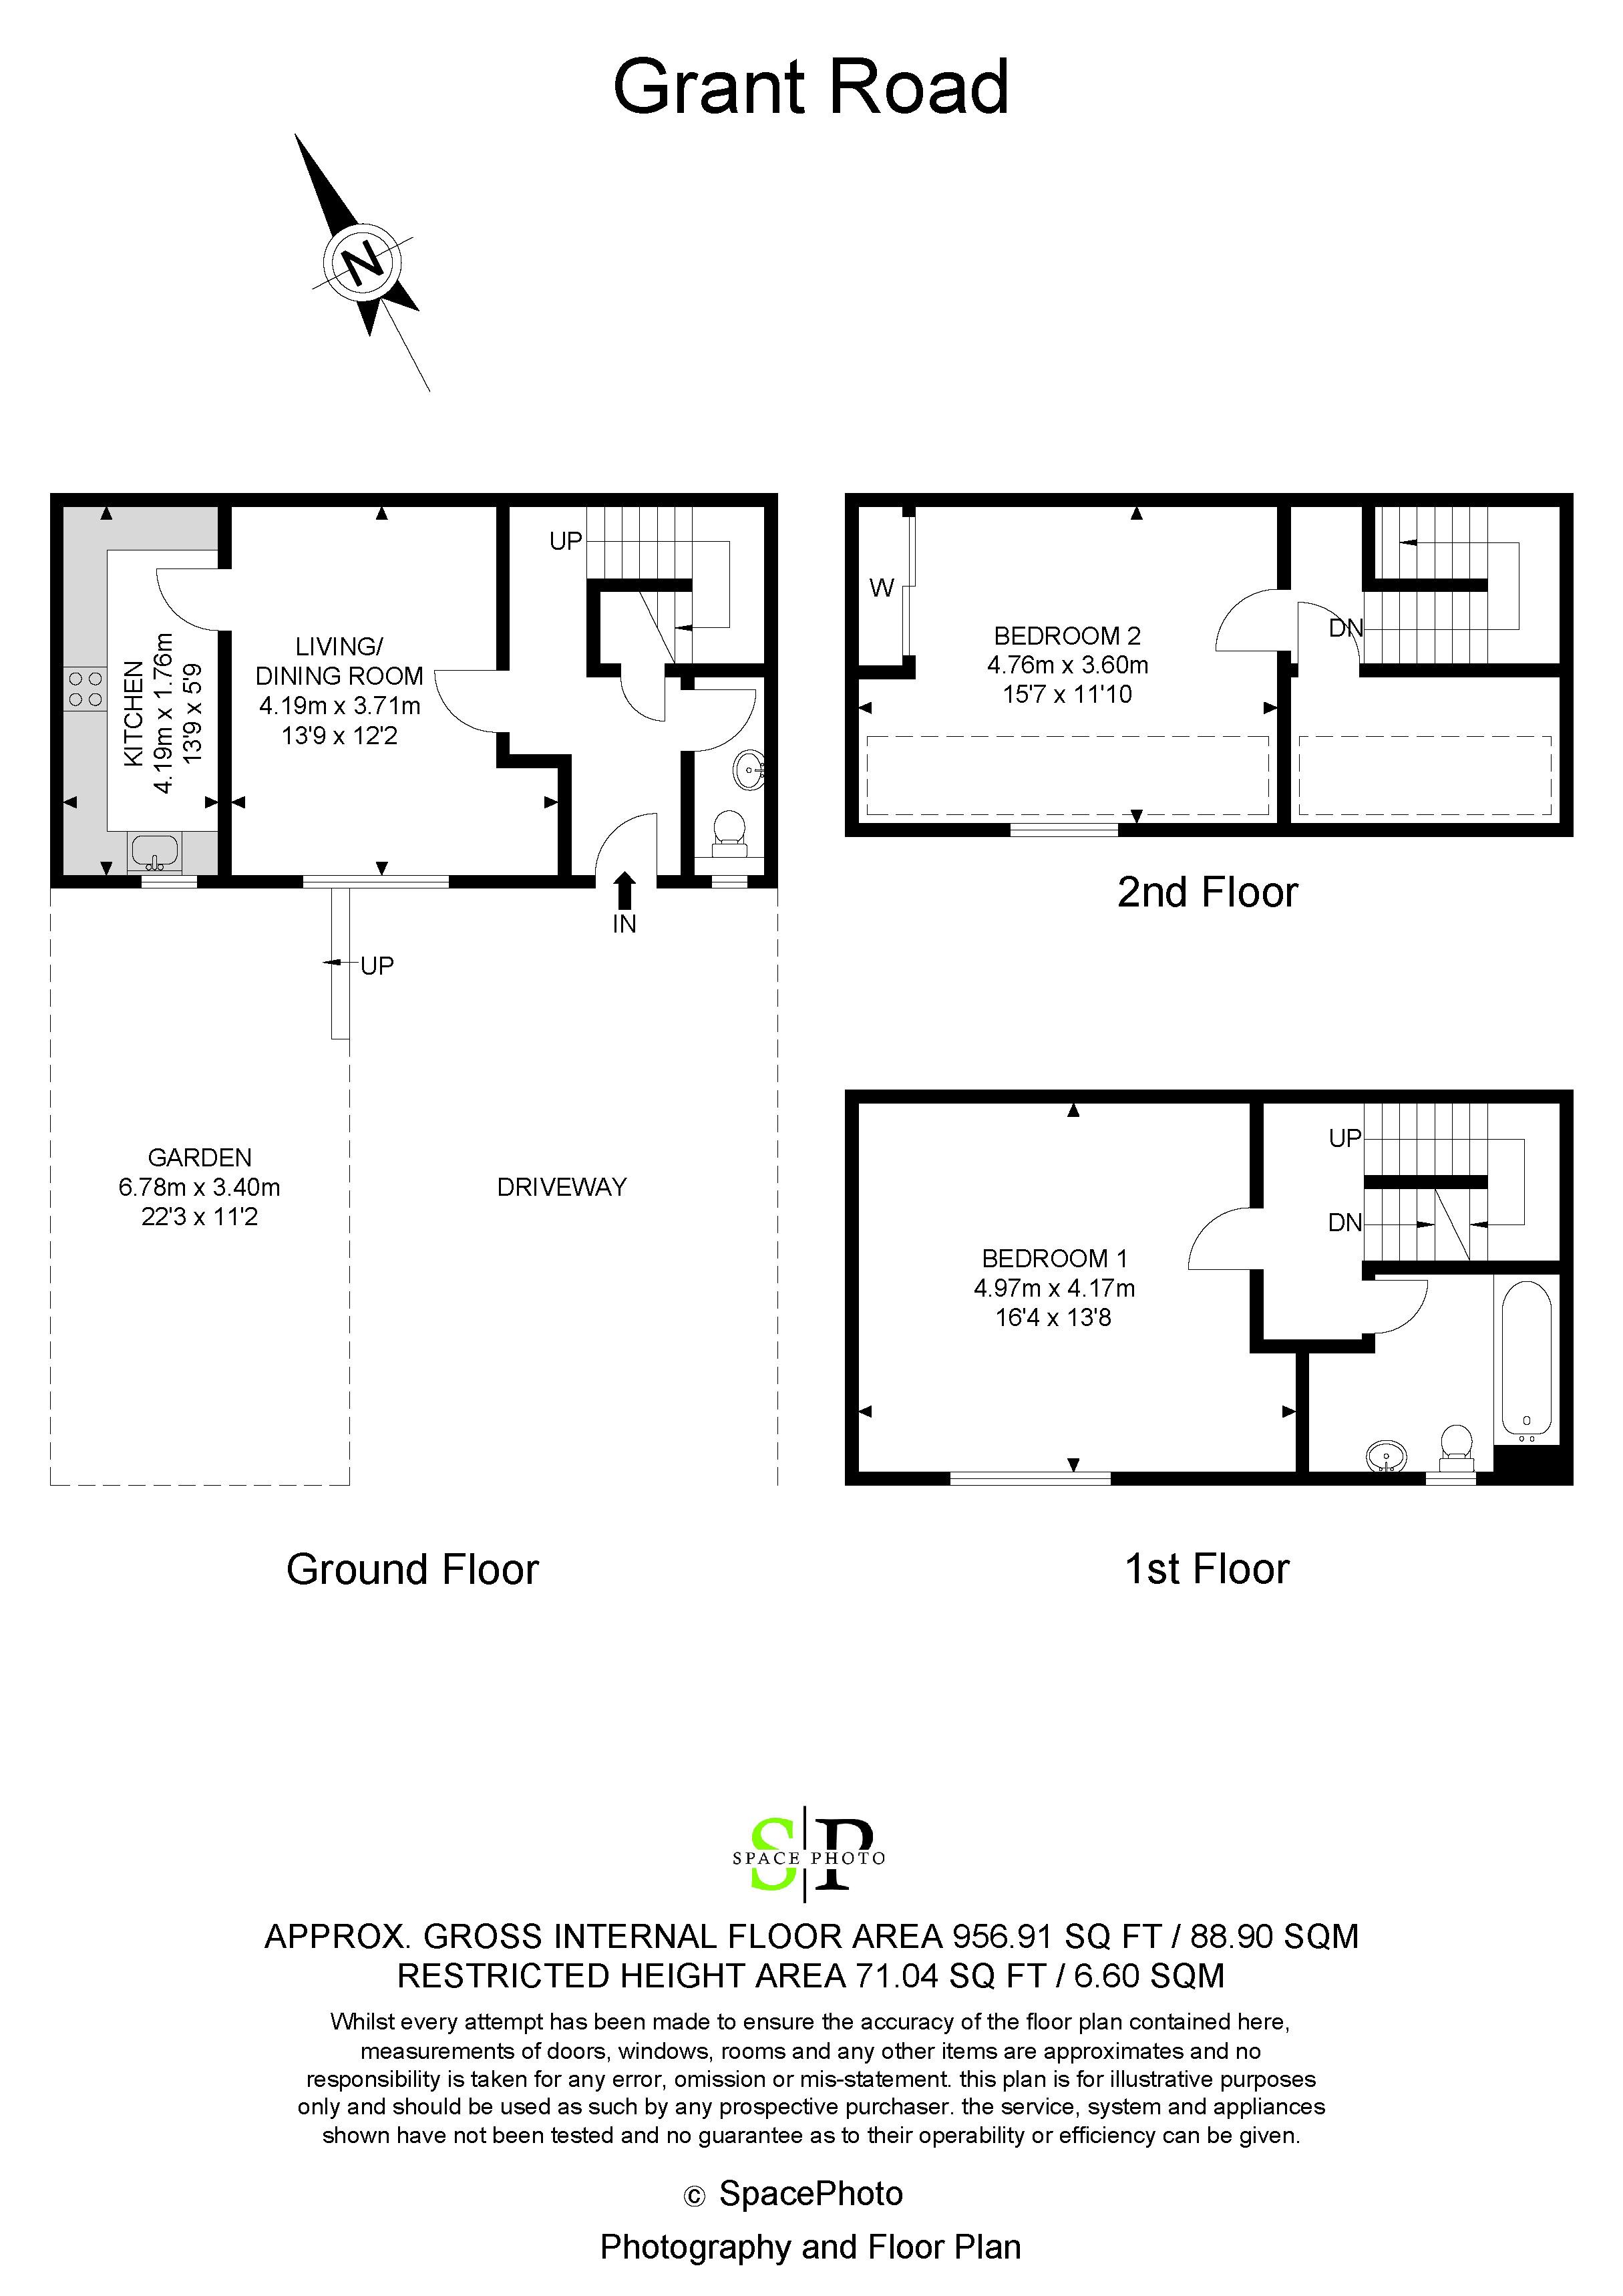 2 bed house for sale in Grant Road, Croydon - Property Floorplan